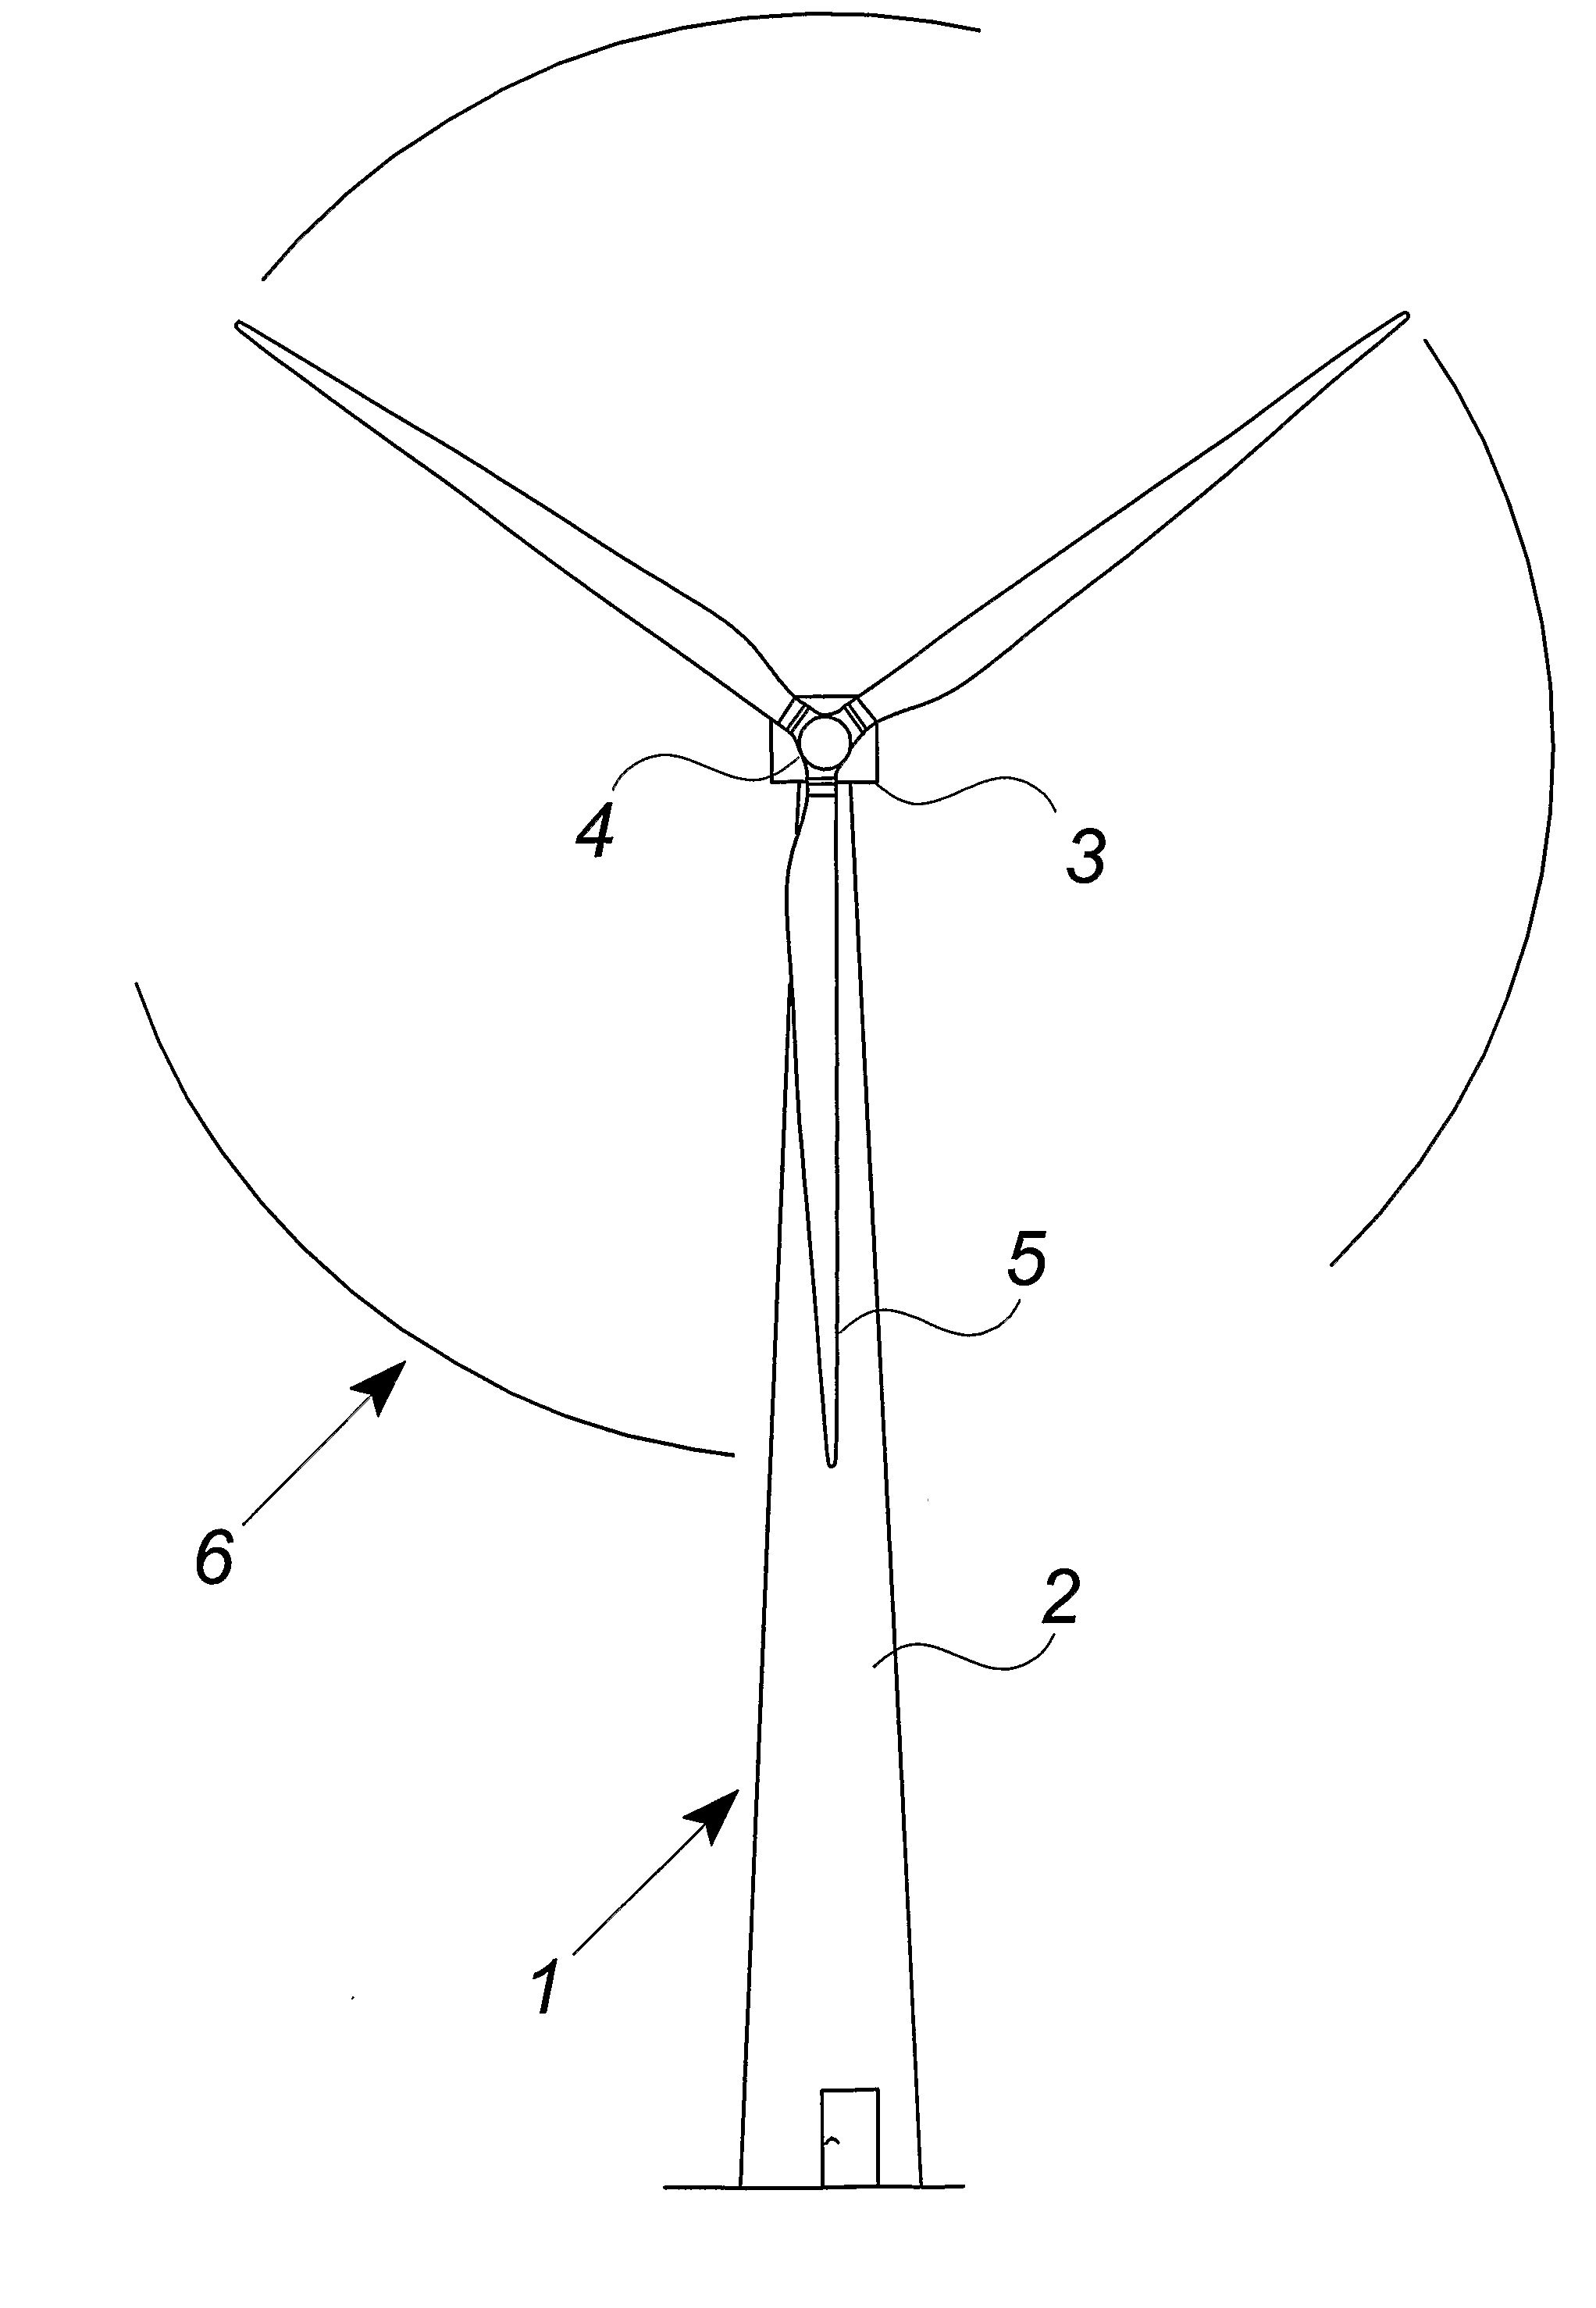 Wind Turbine Comprising a Multiplied Redundancy Control System and Method of Controlling a Wind Turbine